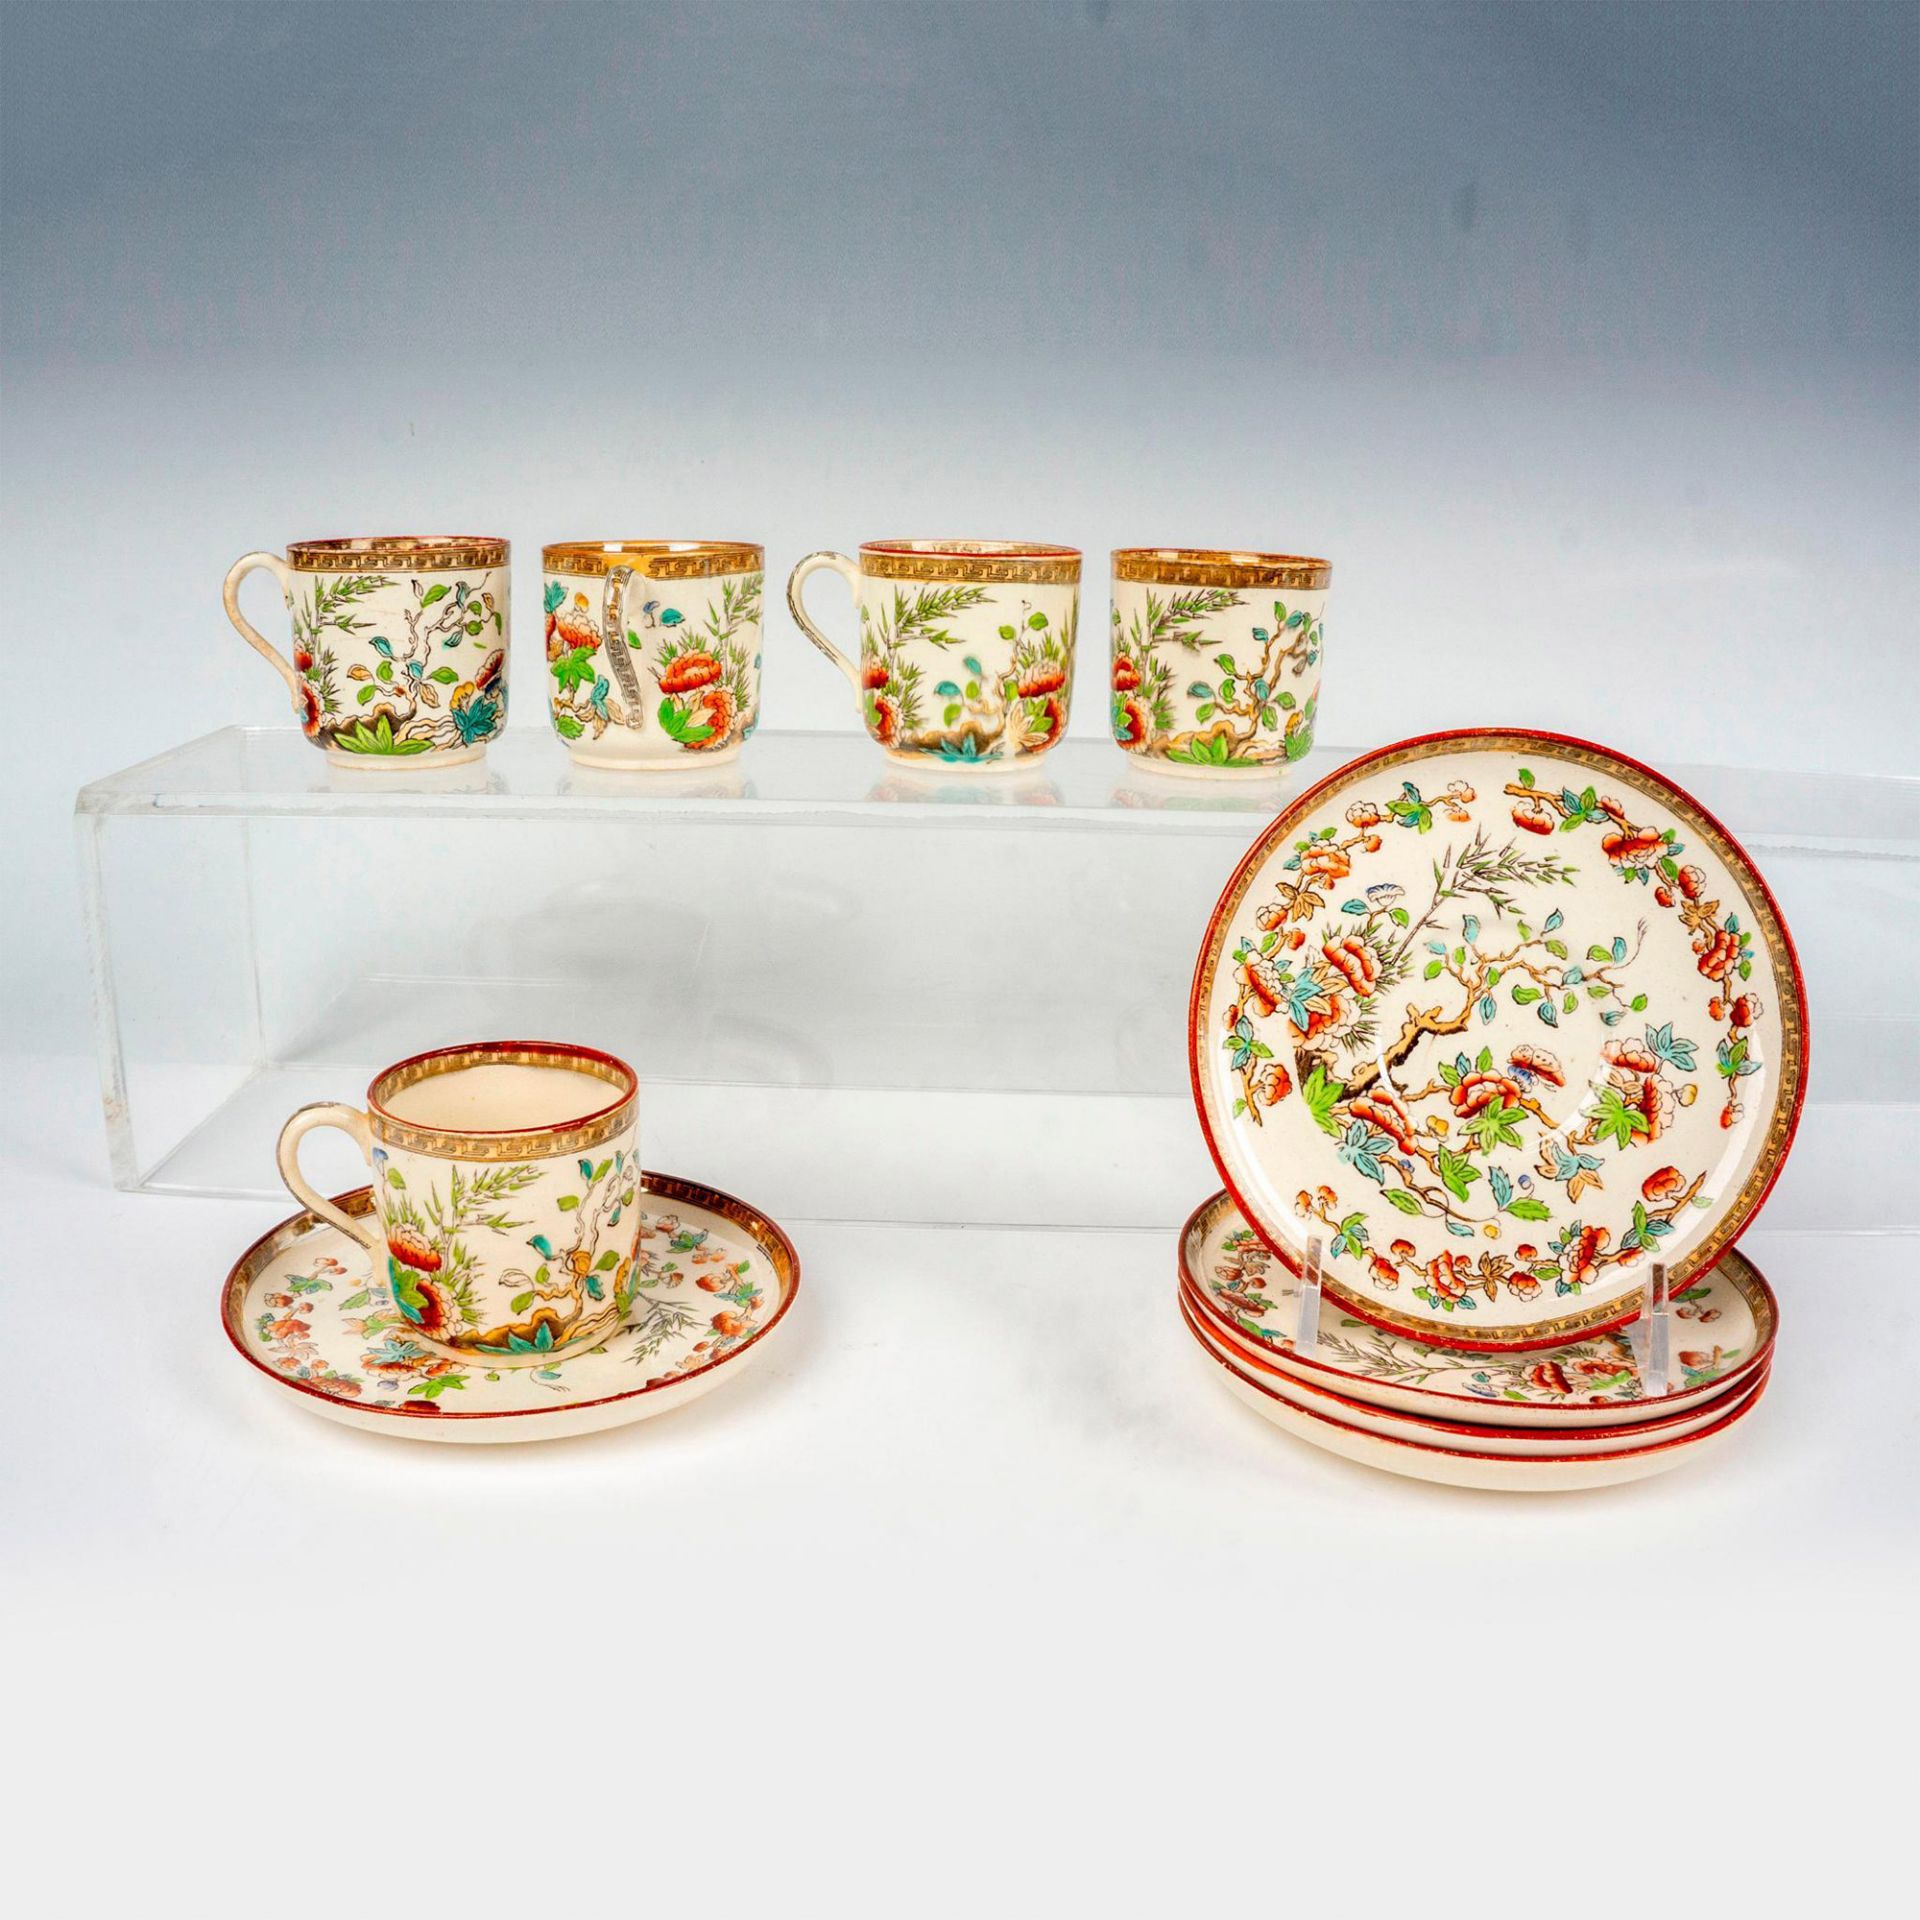 10pc Copeland Demitasse Cups and Saucers - Image 2 of 3